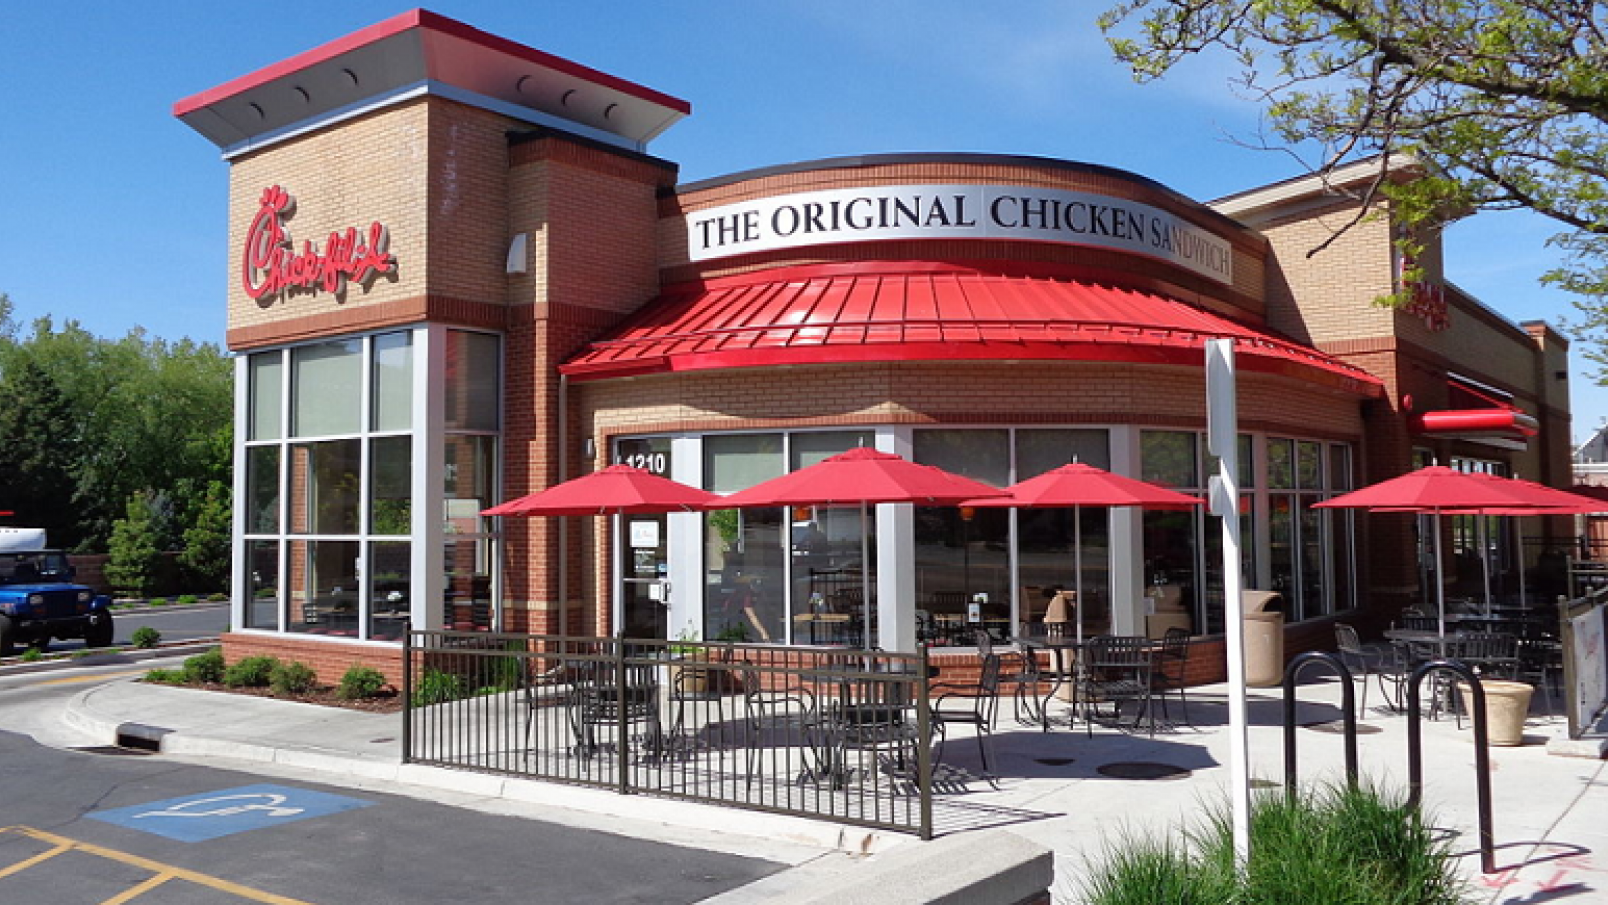 Chick-fil-A Put an Obama and Hillary Supporter in Charge, but Dumped Christians | Frontpagemag